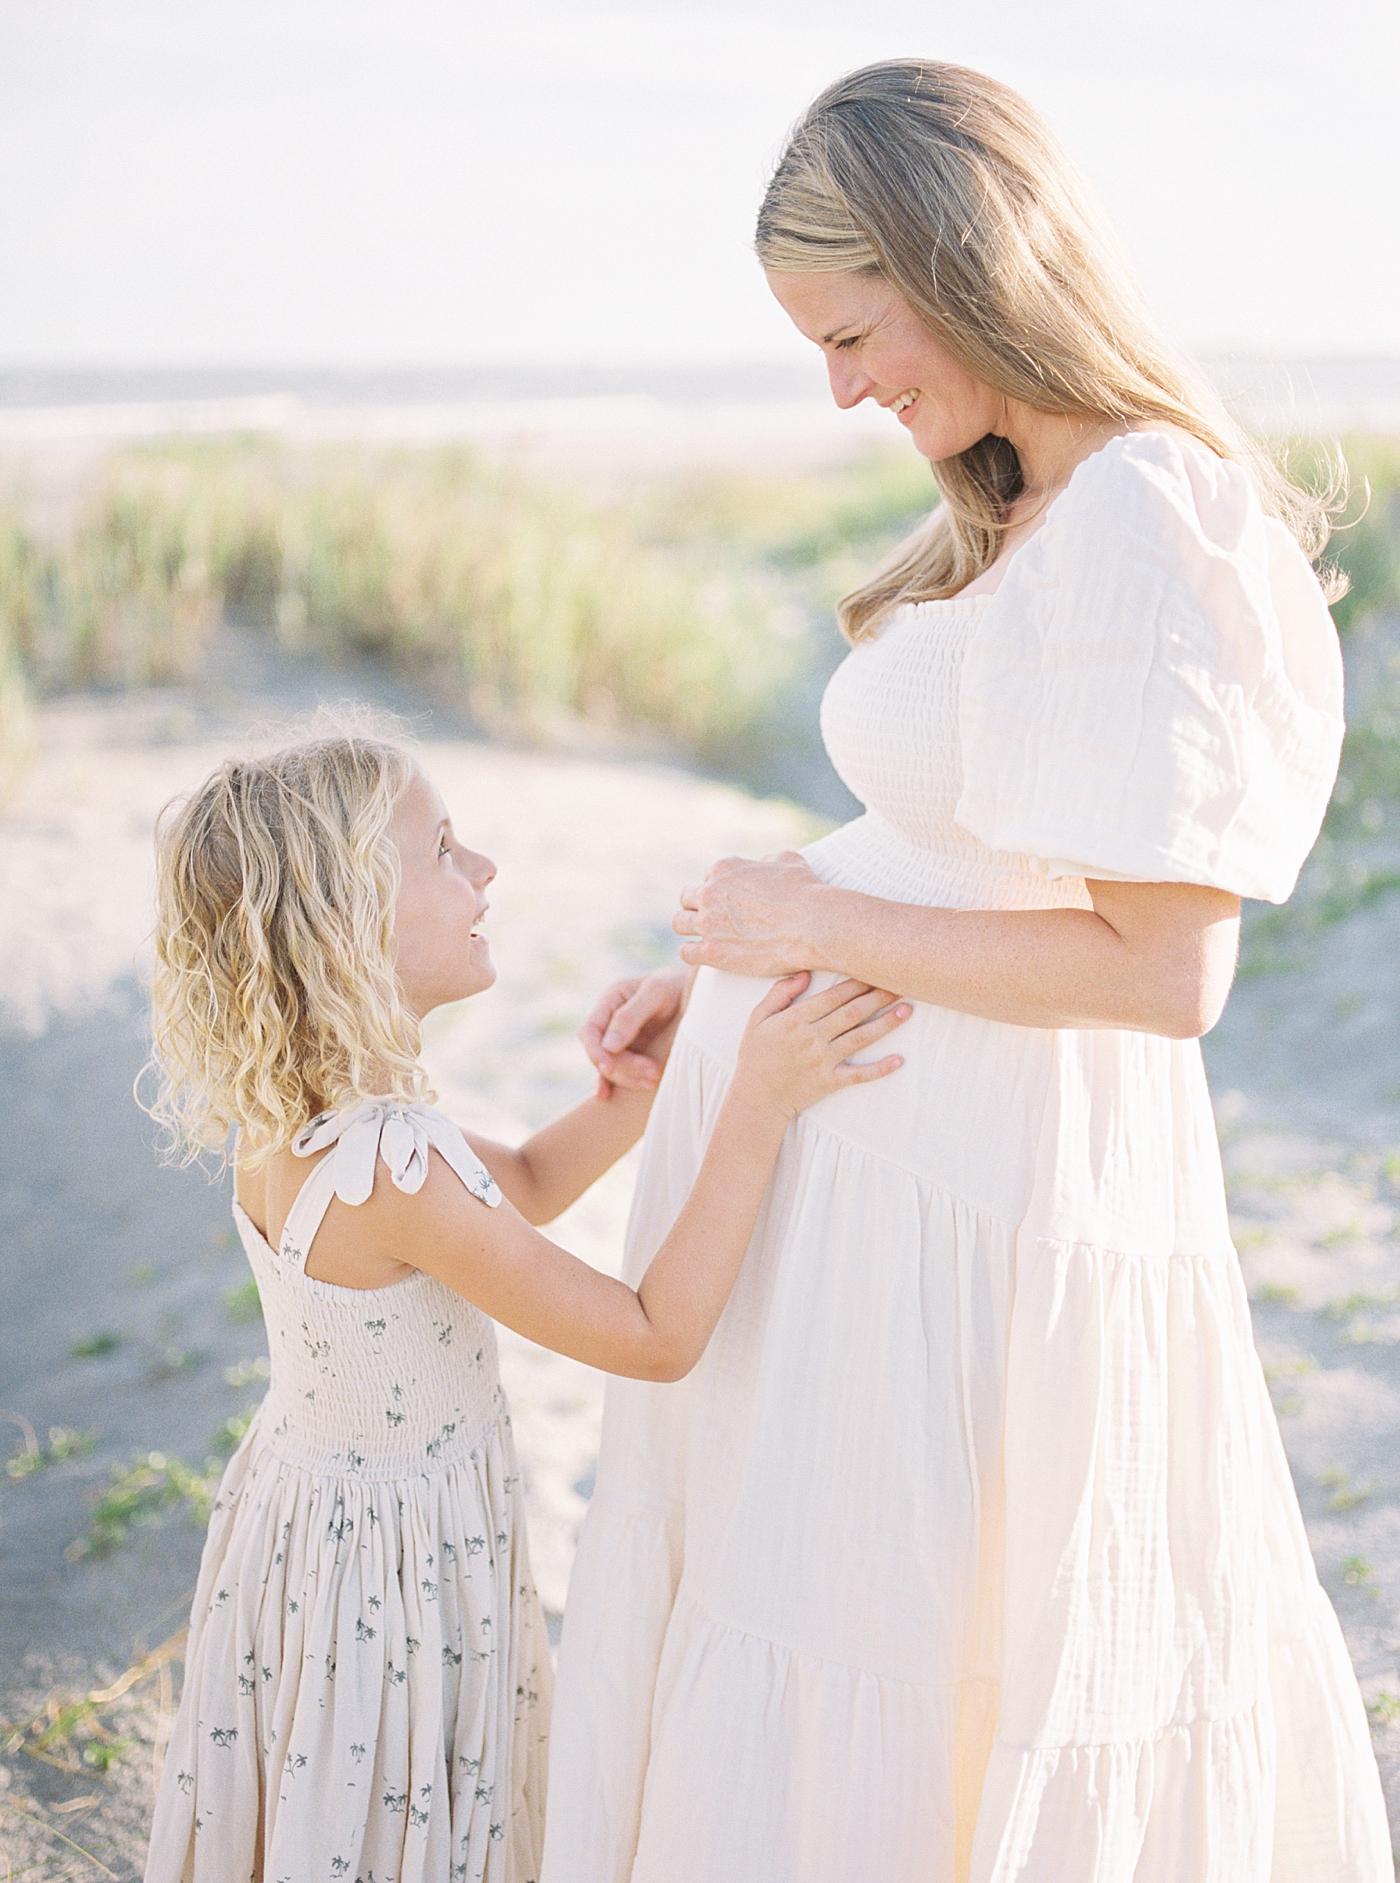 Little girl in floral dress with her hands on mom's pregnant belly | Image by Caitlyn Motycka